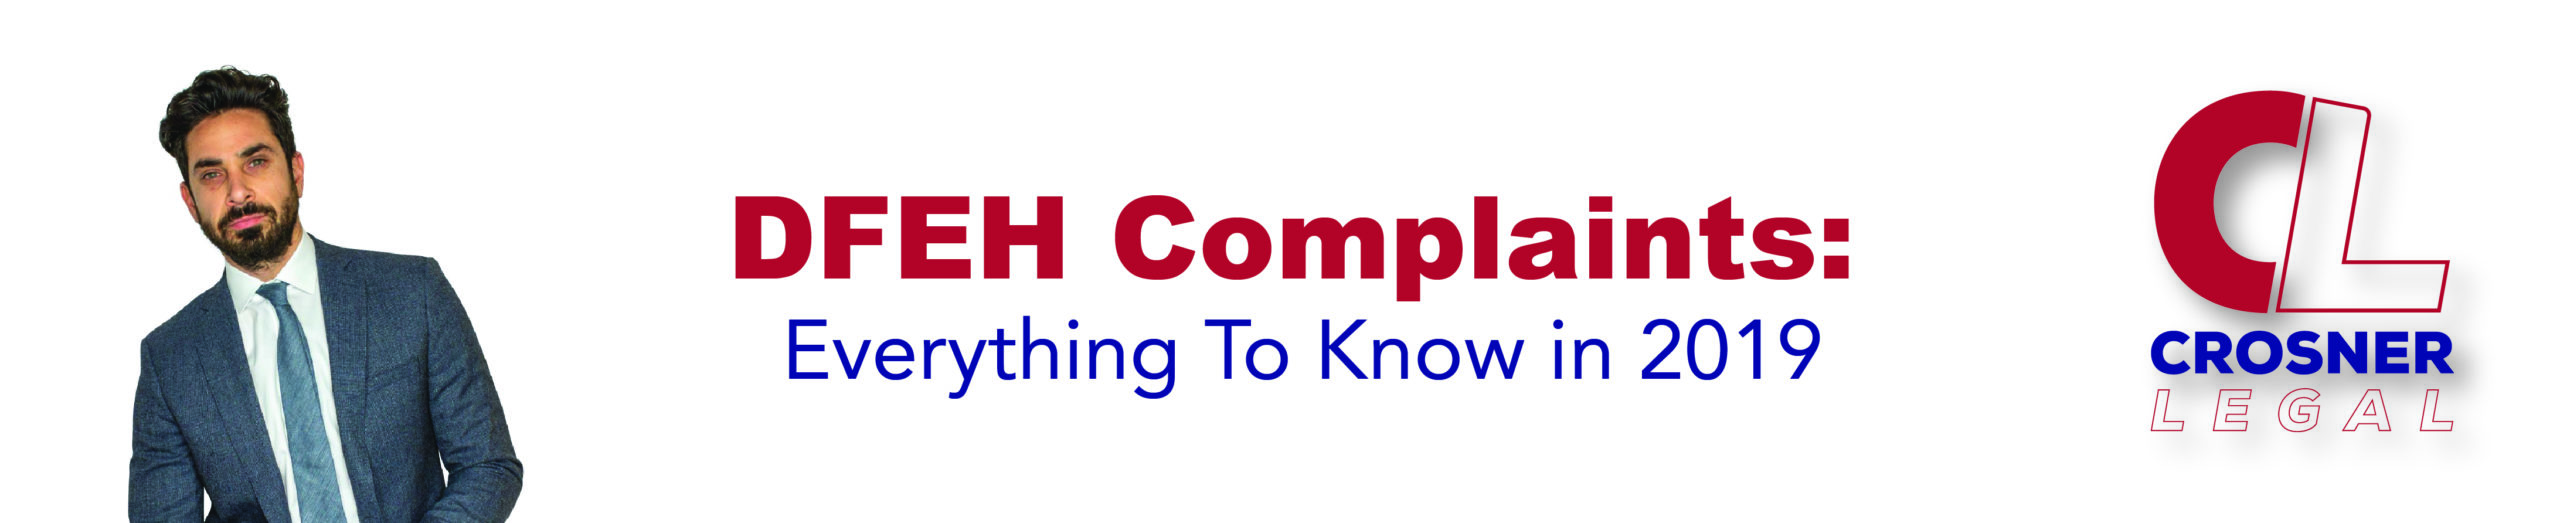 DFEH Complaints: Everything To Know in 2019